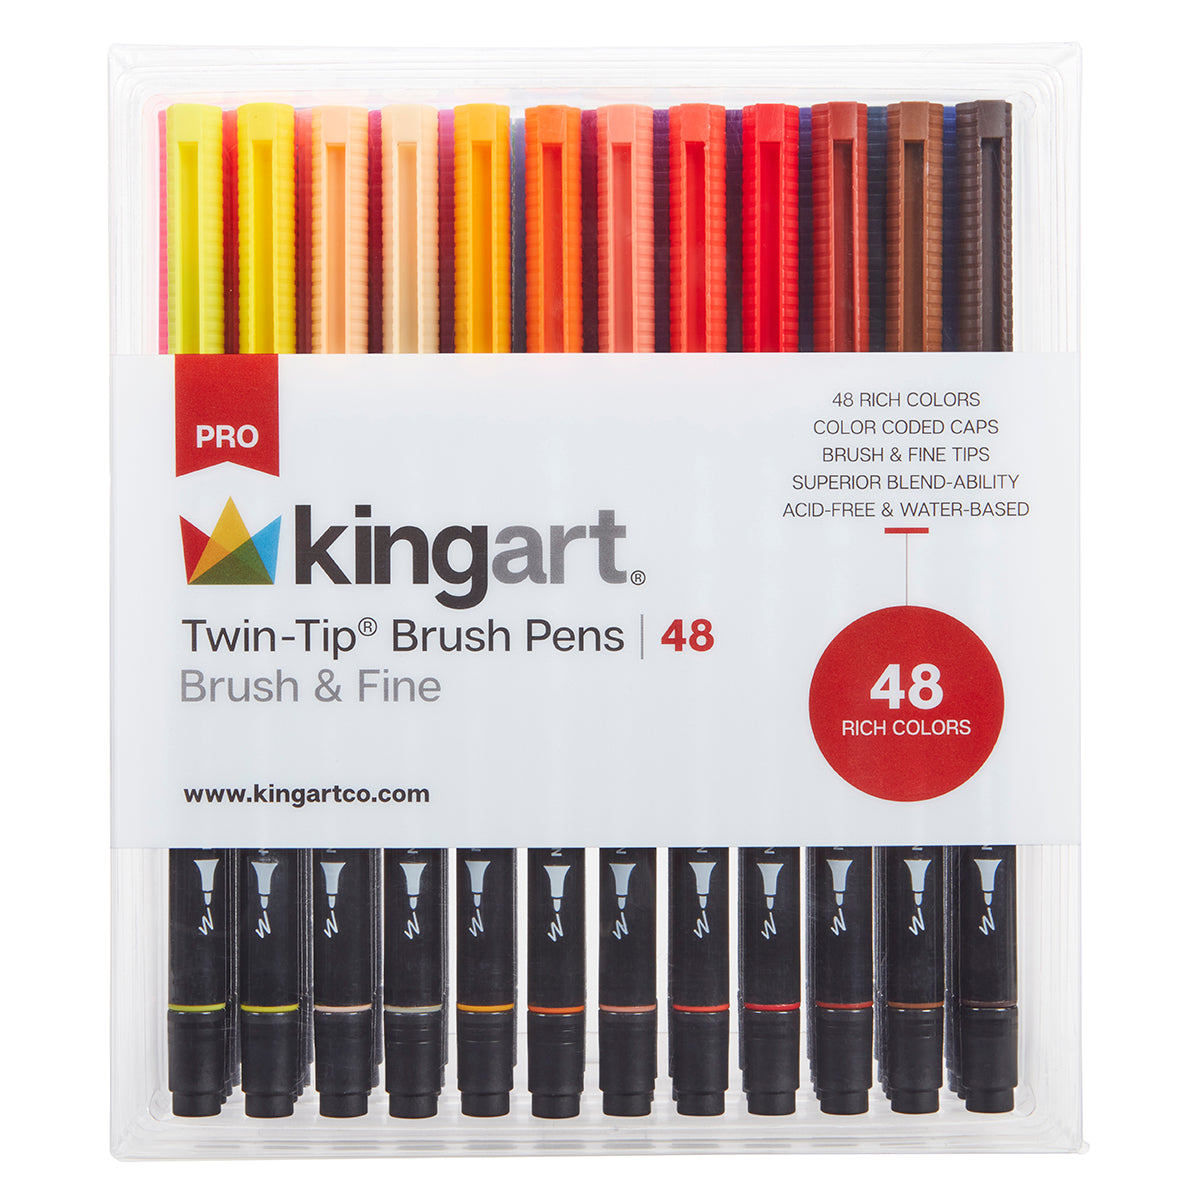 Kingart Double-Ended Art Marker Vivid Assortment 120 Assorted Colors Markers